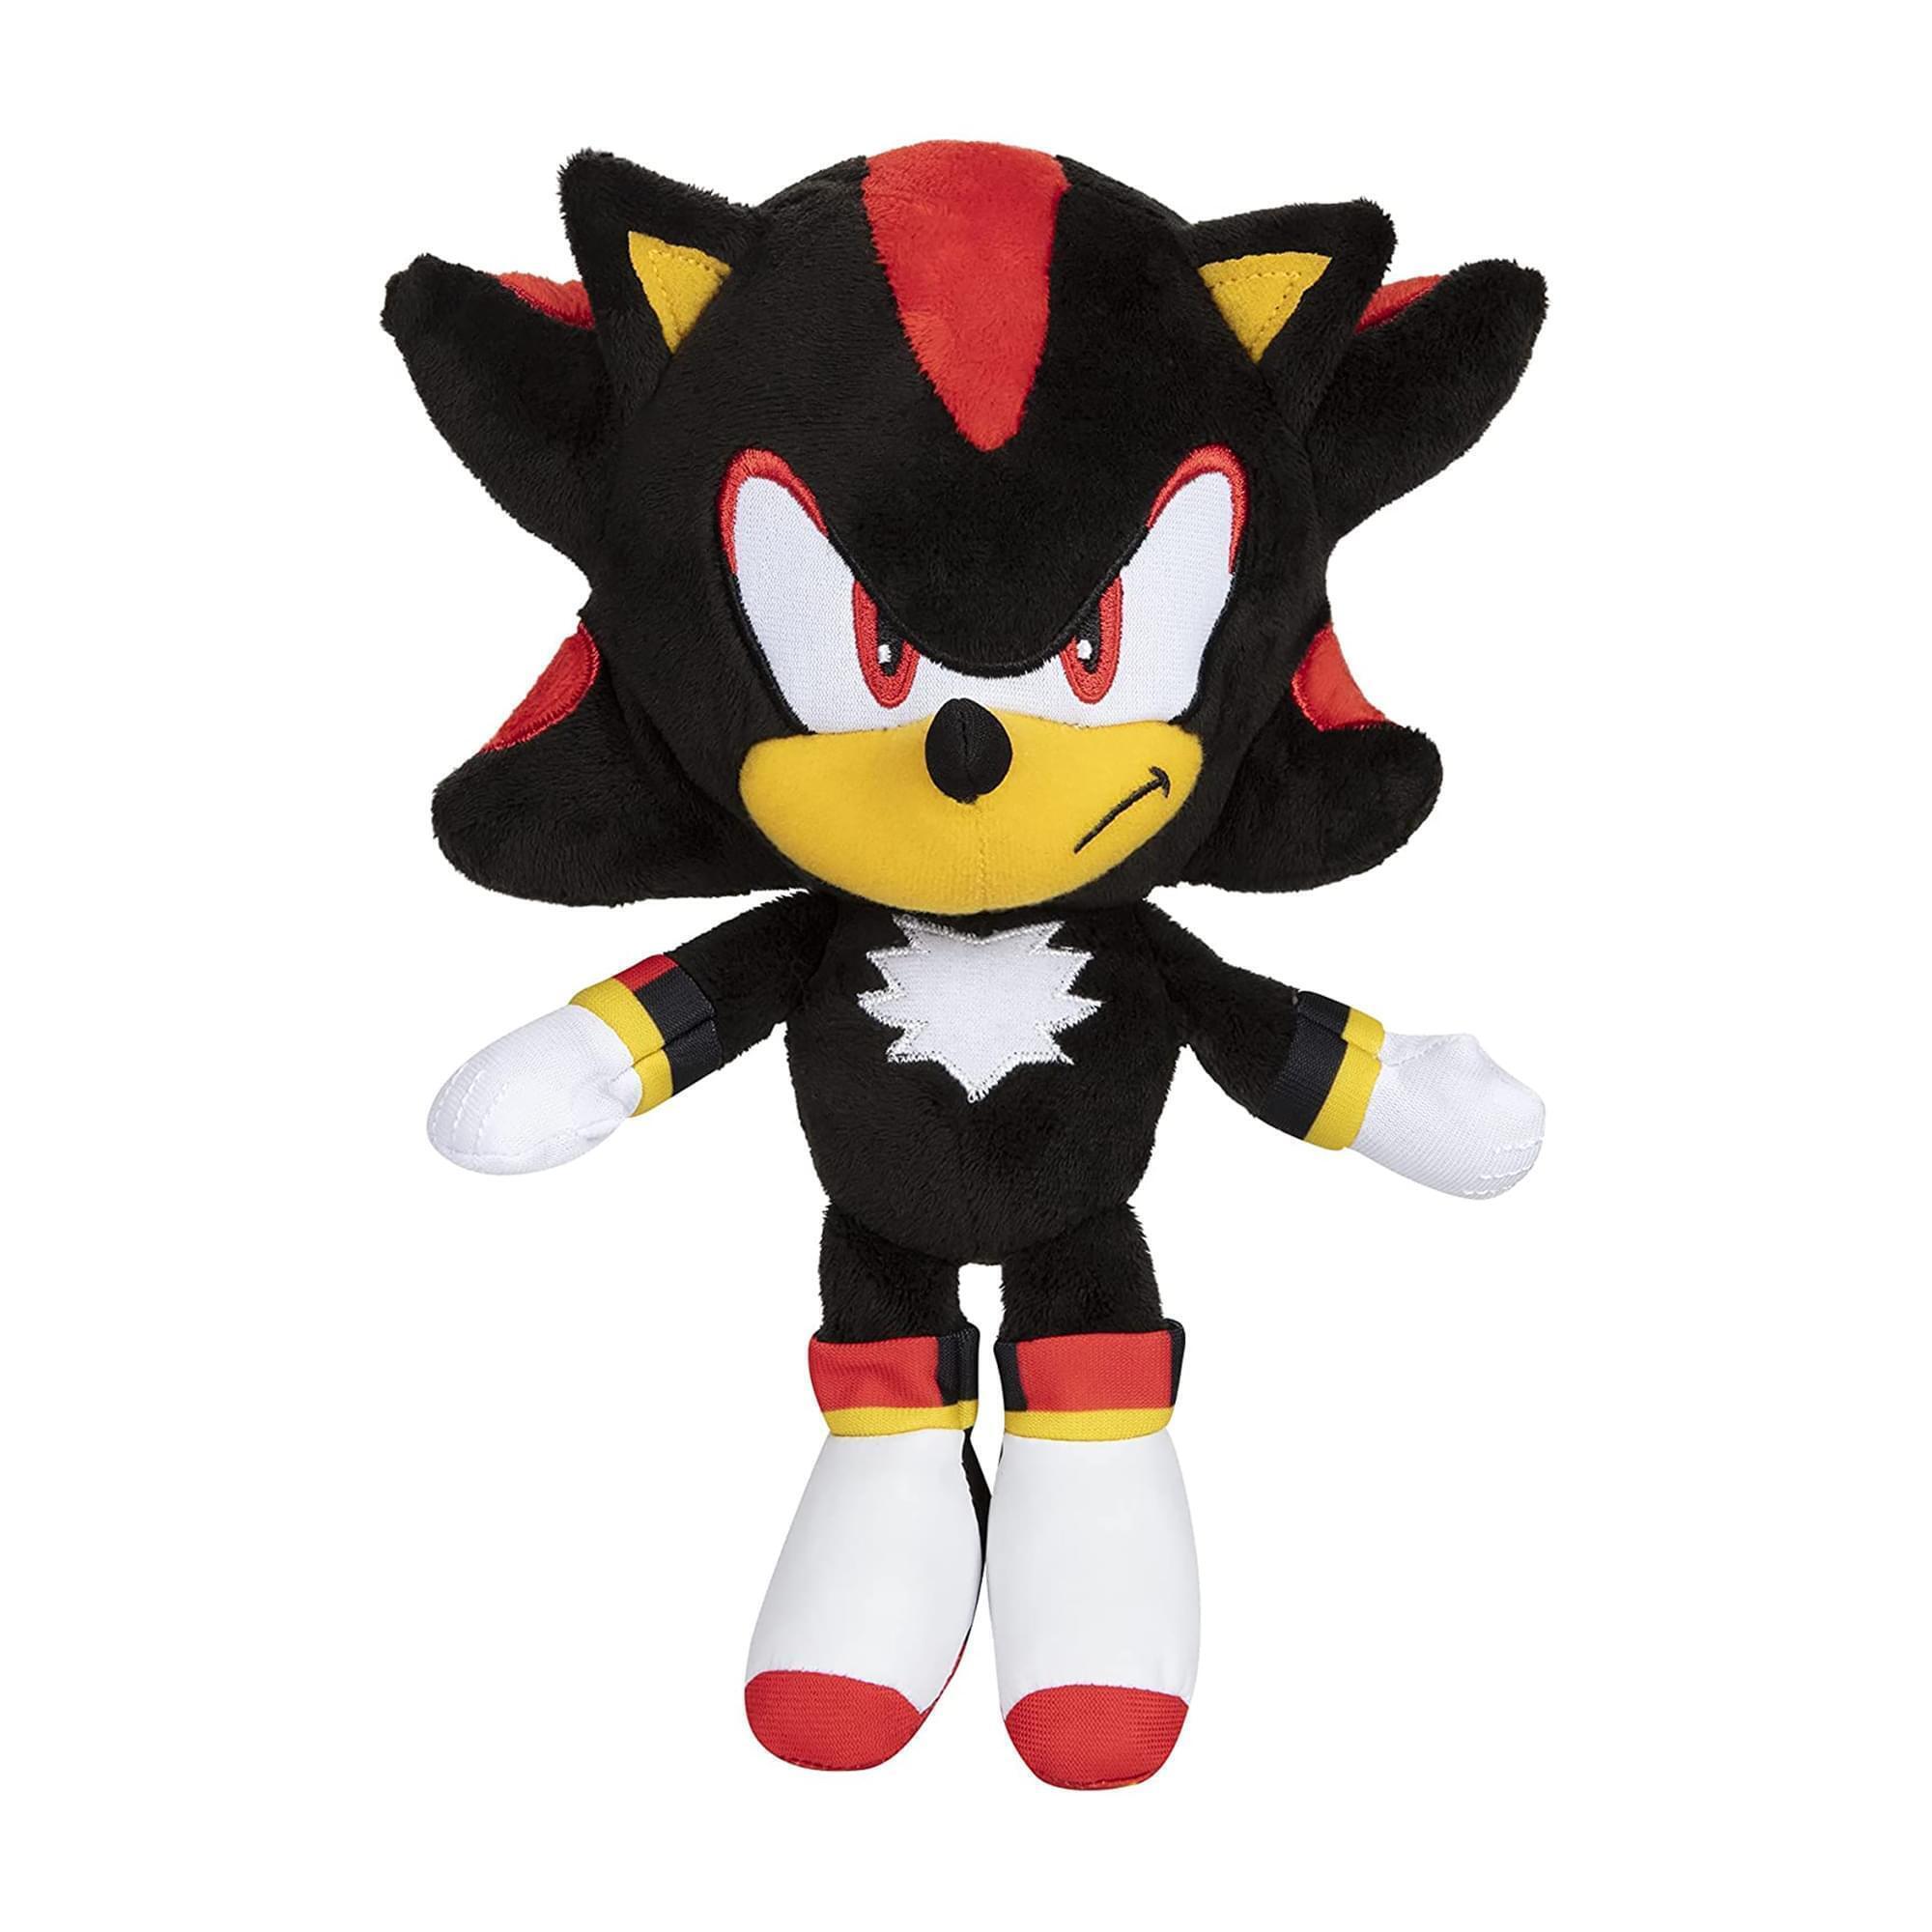 Licensed Sonic Prime Plush Toy and 5 Action Figures Coming July - Merch -  Sonic Stadium